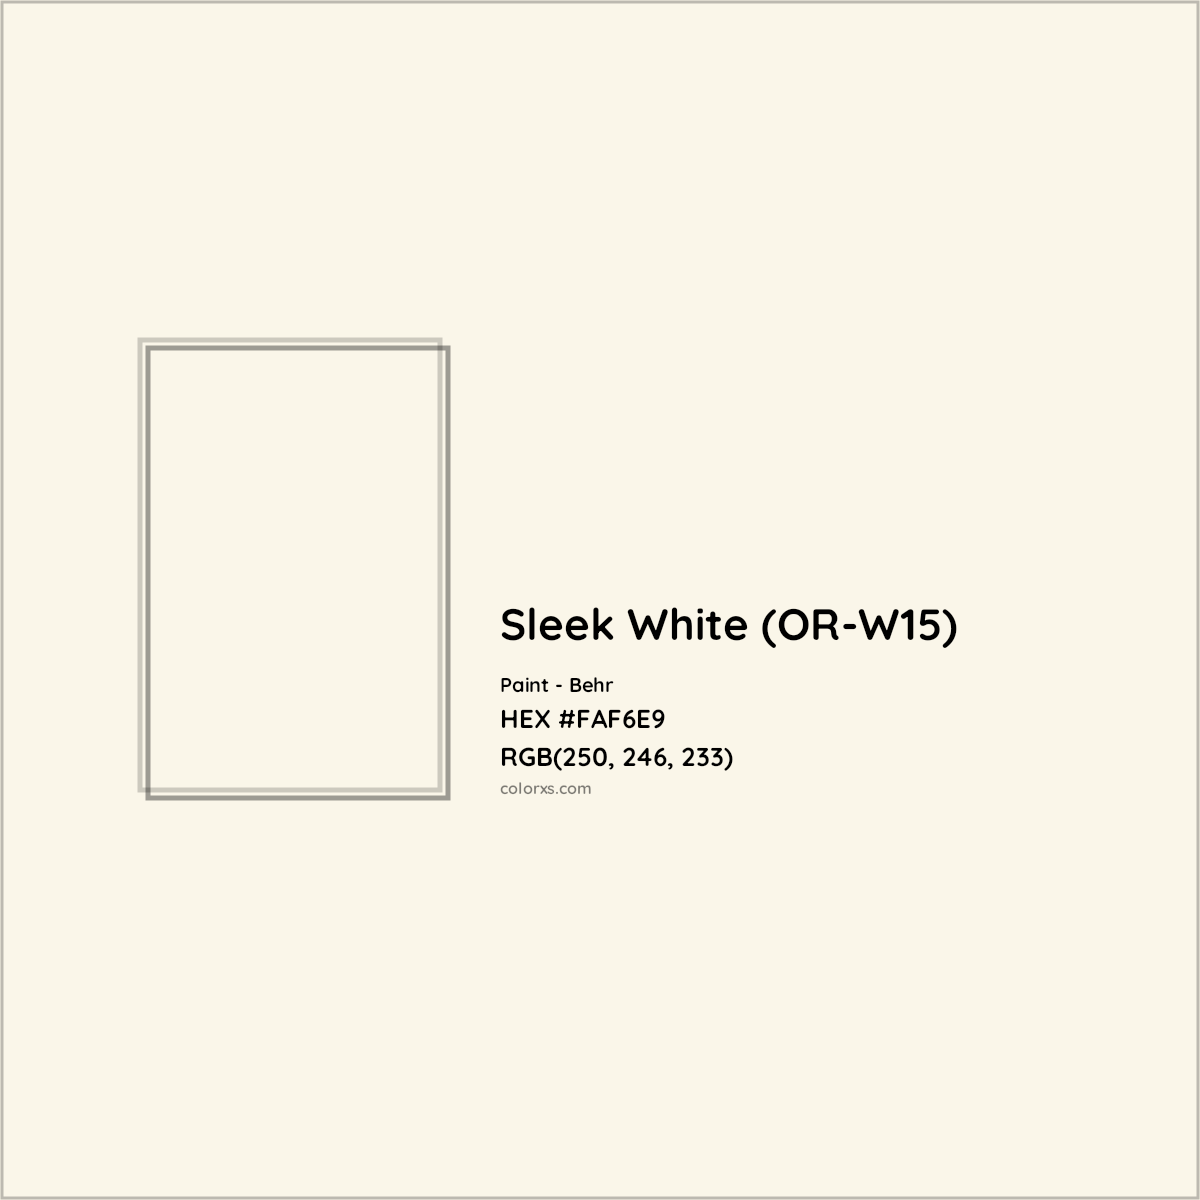 HEX #FAF6E9 Sleek White (OR-W15) Paint Behr - Color Code